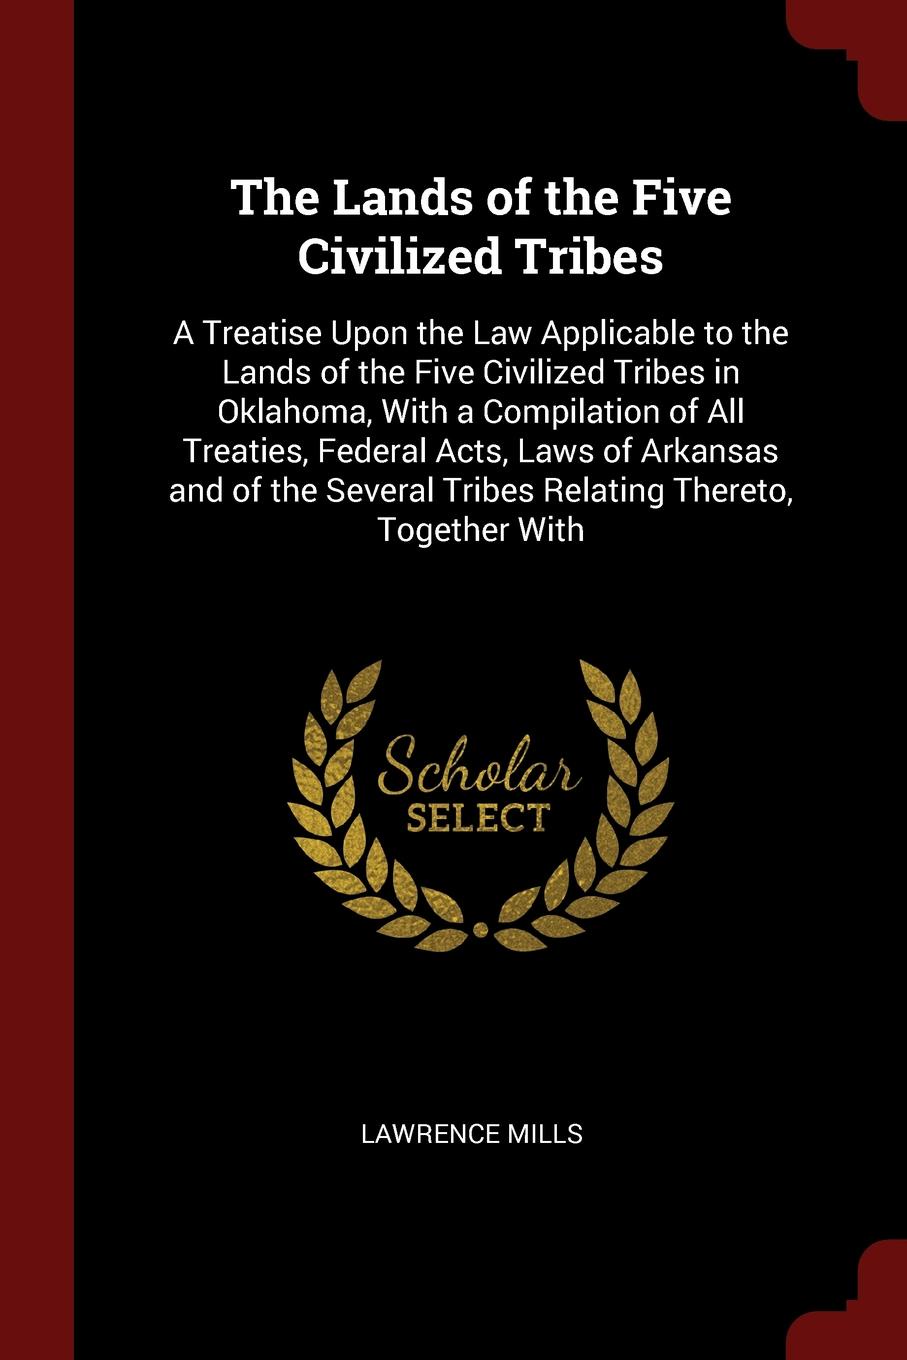 The Lands of the Five Civilized Tribes. A Treatise Upon the Law Applicable to the Lands of the Five Civilized Tribes in Oklahoma, With a Compilation of All Treaties, Federal Acts, Laws of Arkansas and of the Several Tribes Relating Thereto, Togeth...